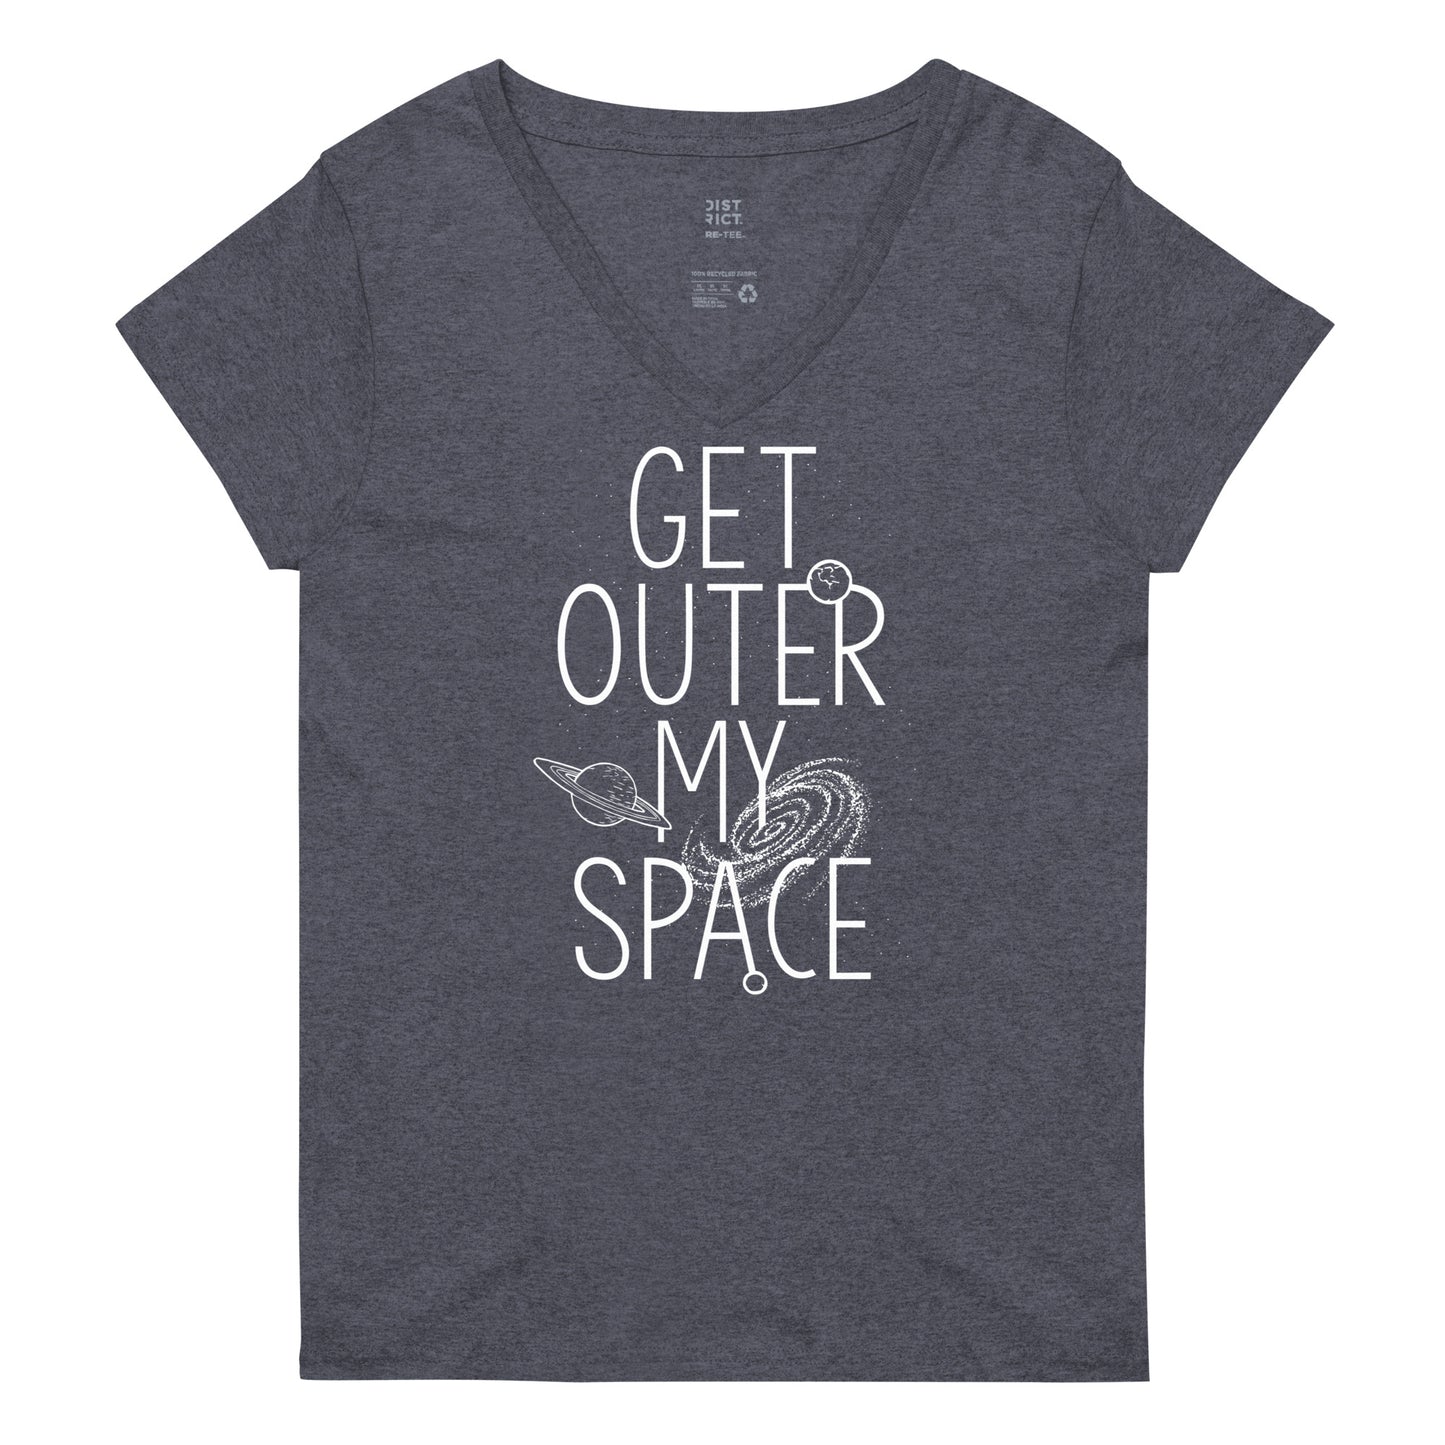 Get Outer My Space Women's V-Neck Tee